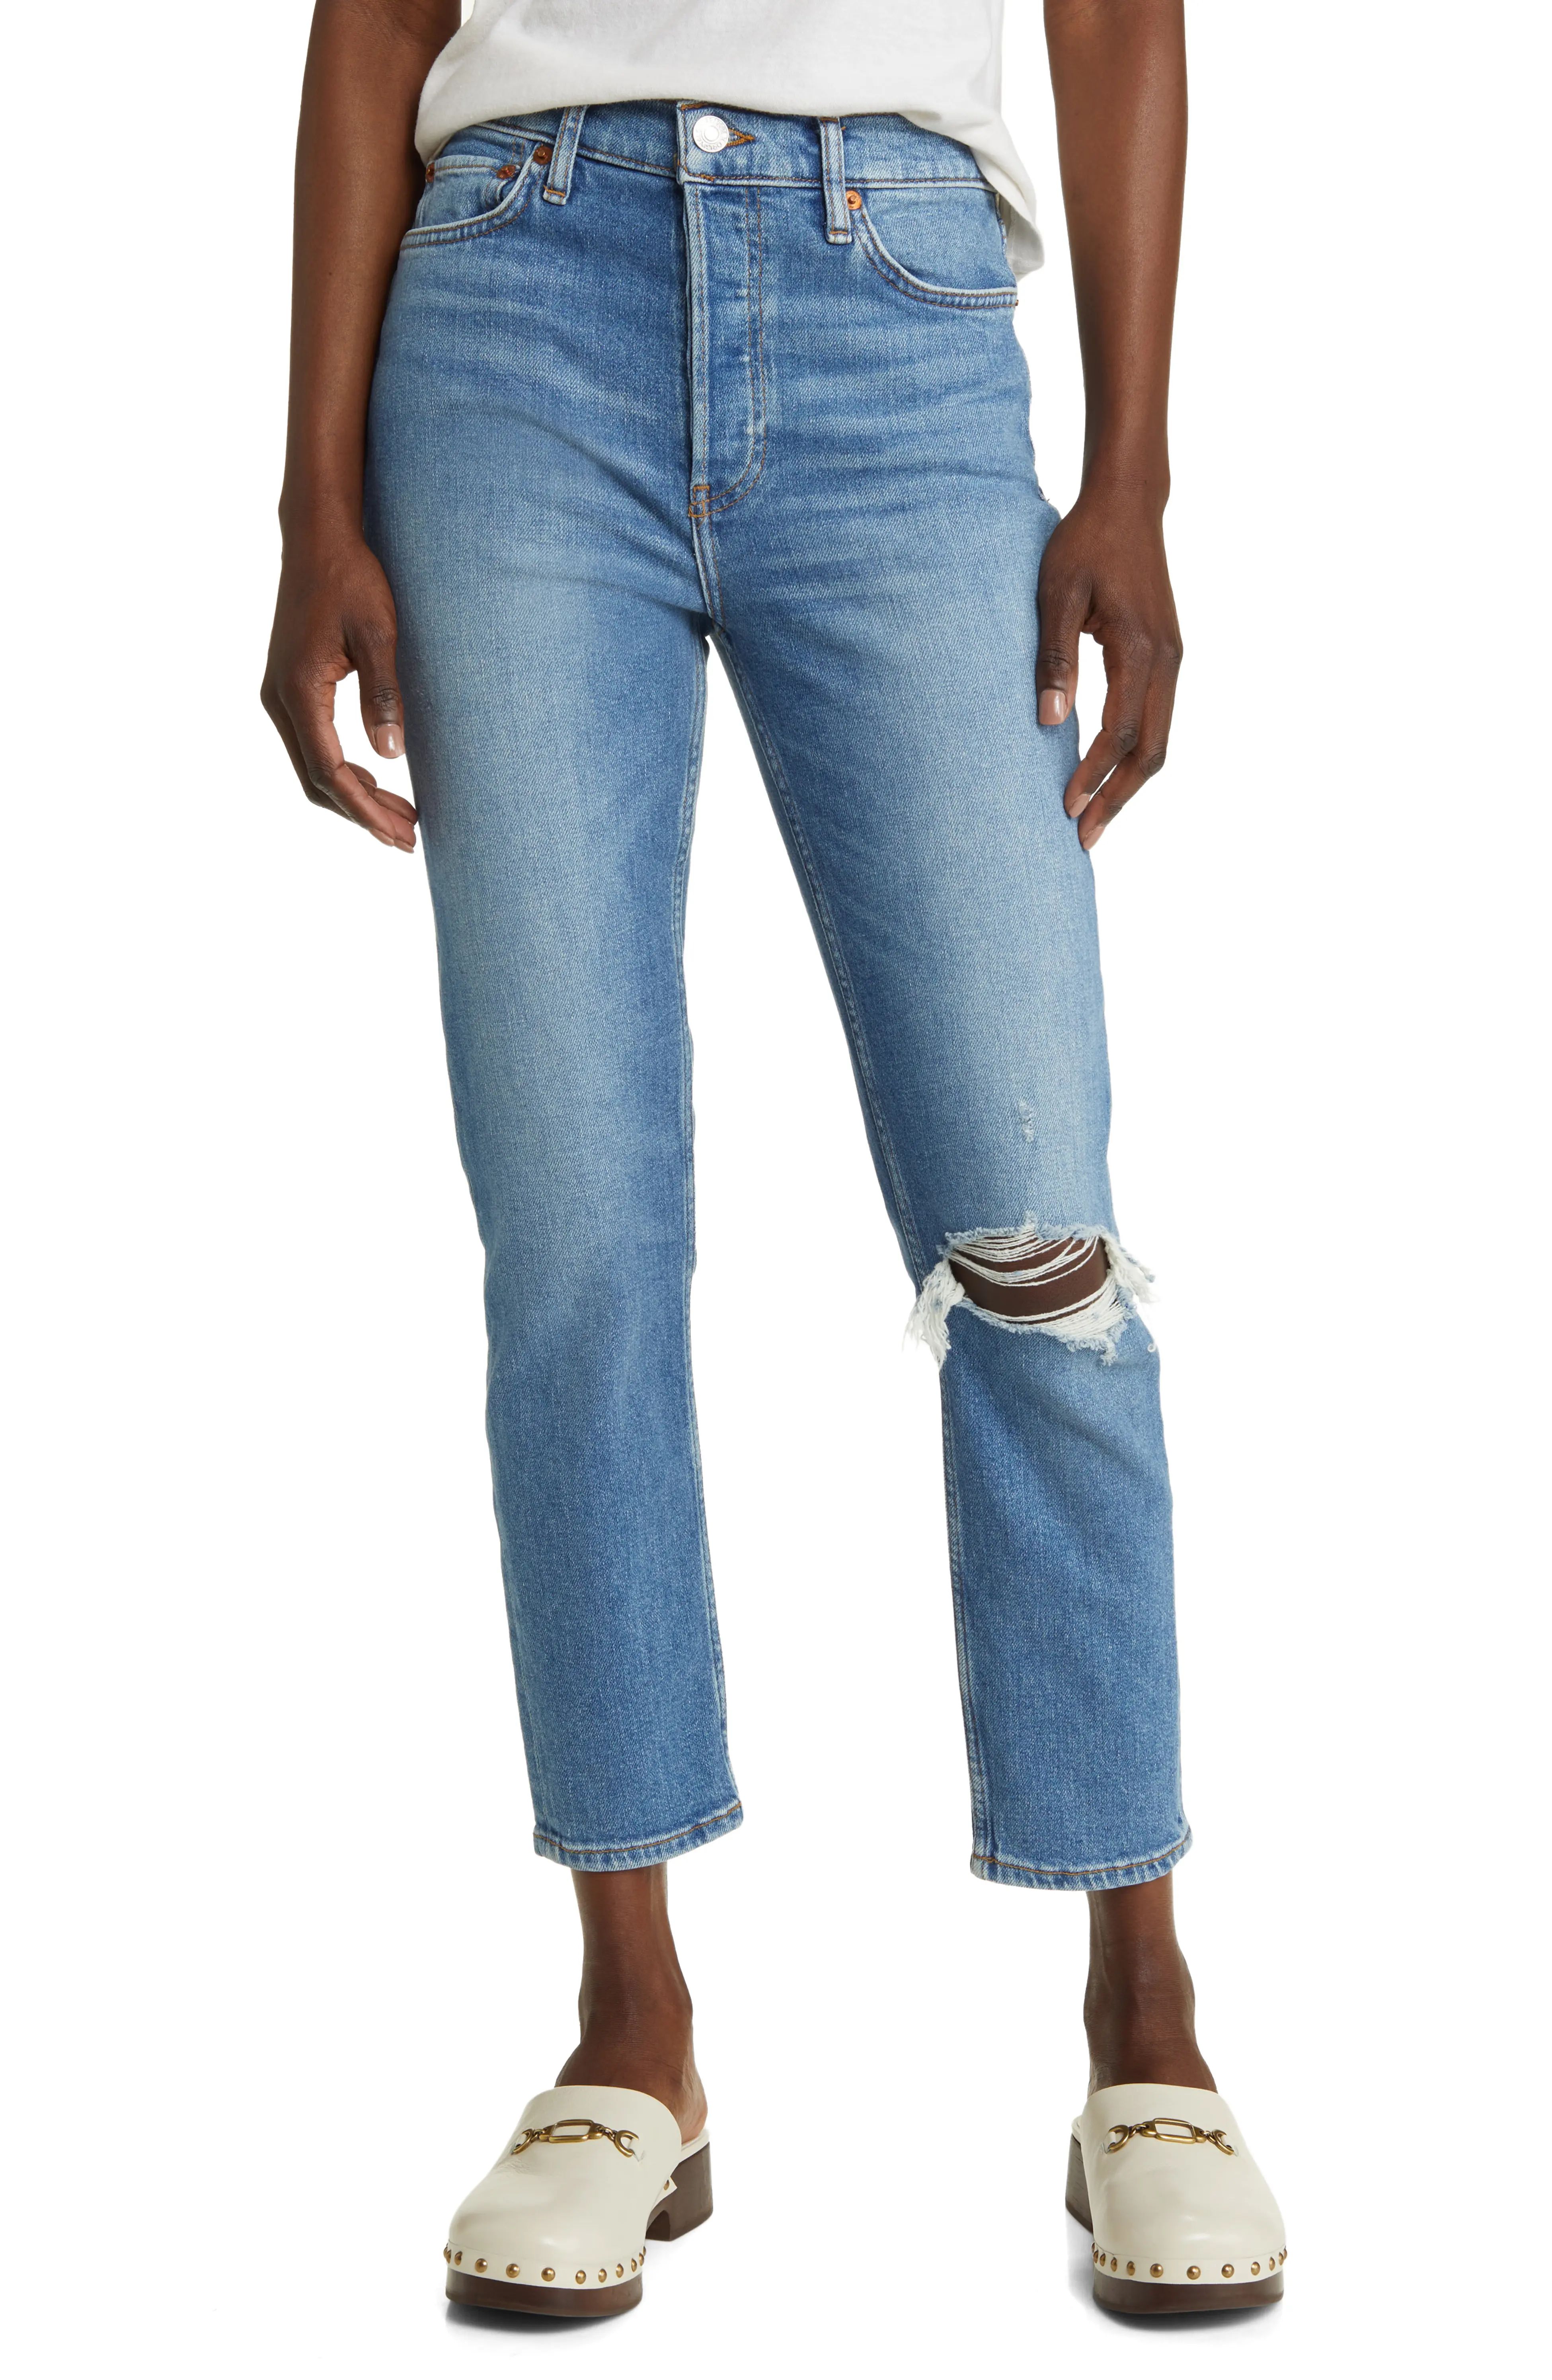 '90s Ripped Ankle Skinny Jeans | Nordstrom